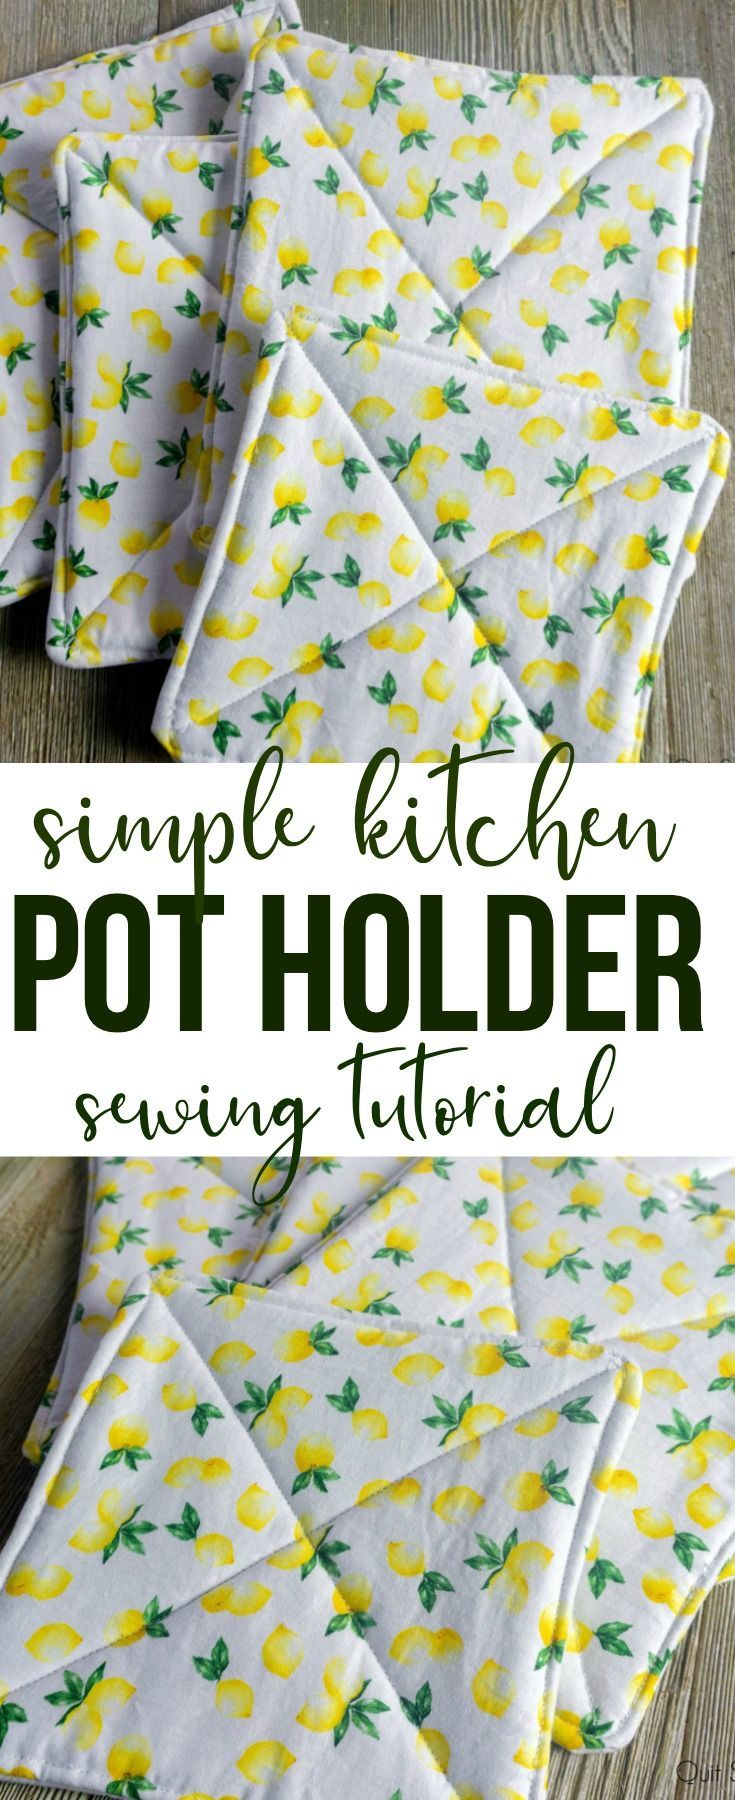 Simple Pot Holder Sewing Tutorial - Simple Pot Holder Sewing Tutorial -   17 fabric crafts to sell gift ideas